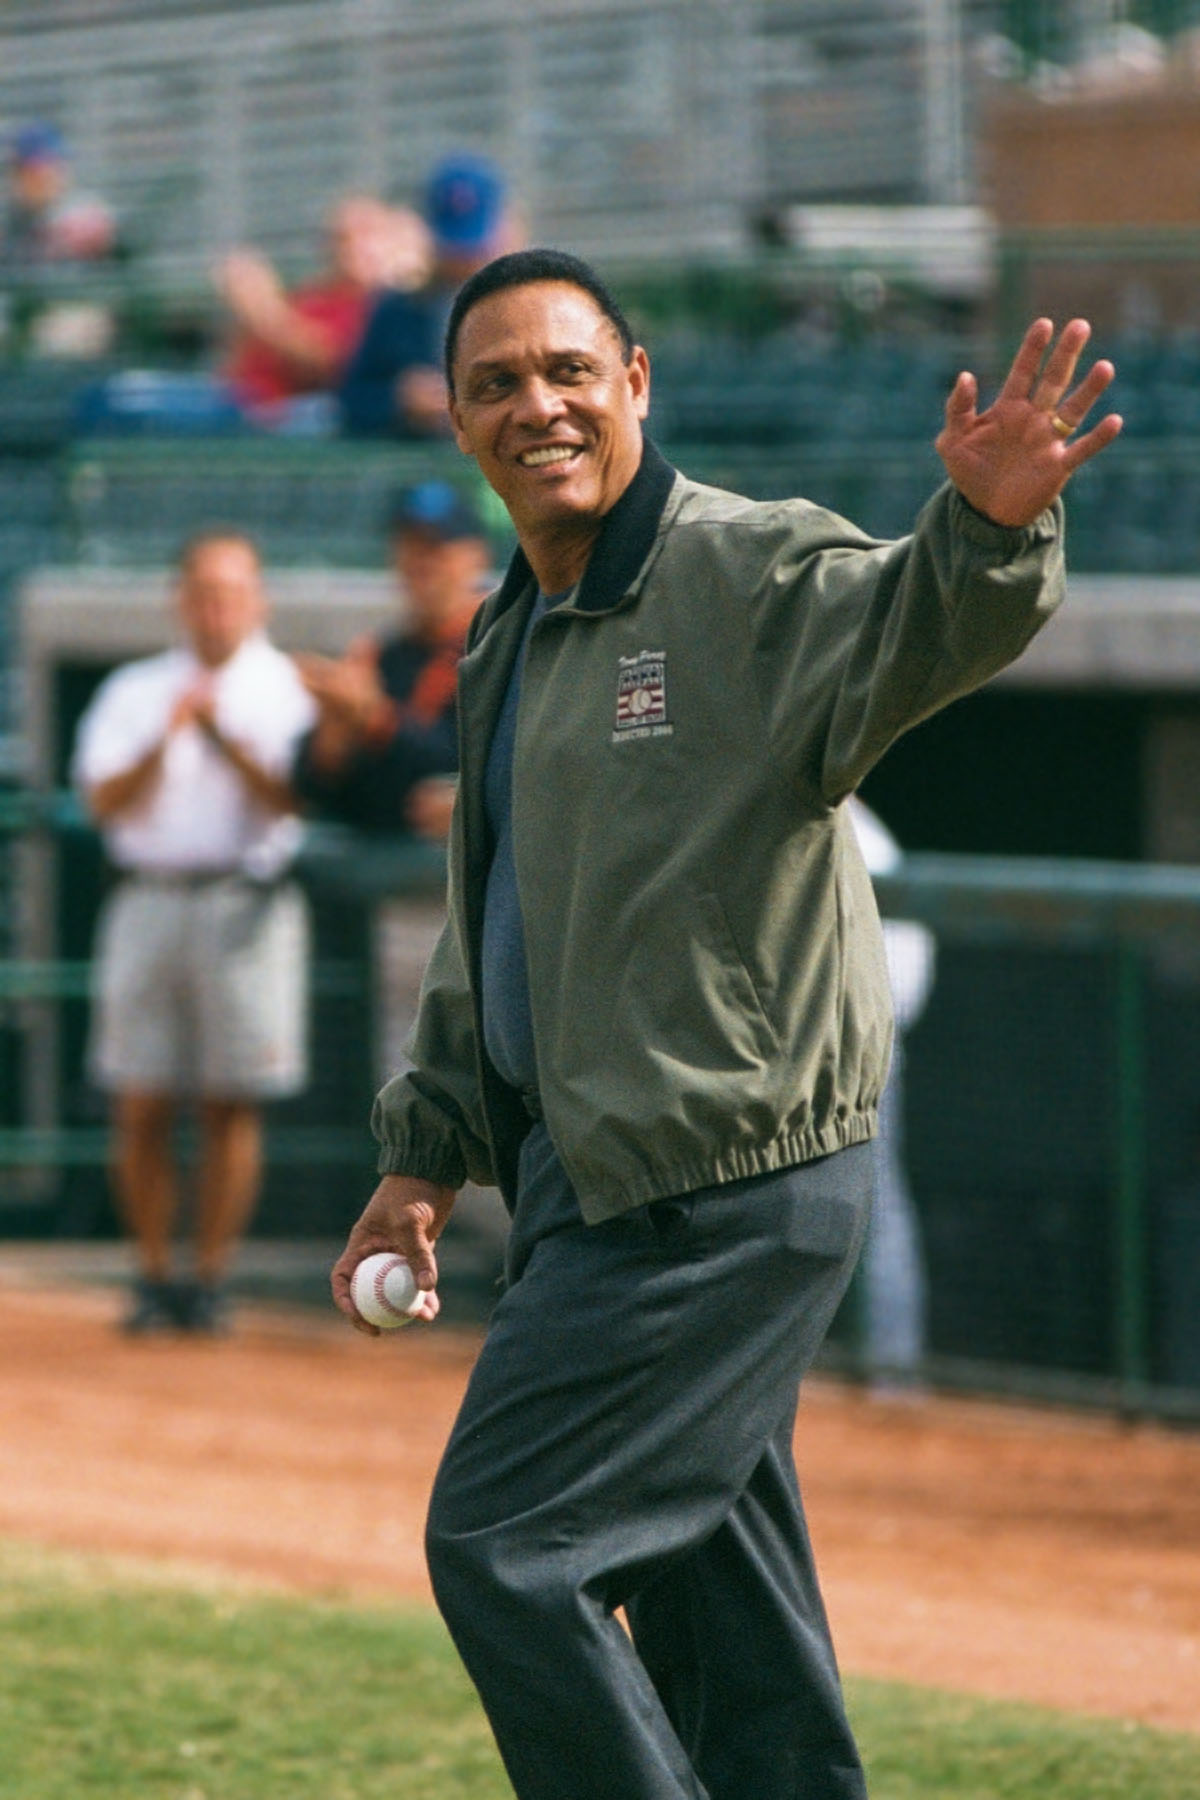 Tony Perez in his new Hall of Fame jacket throws out the first pitch at an Arizona Fall League game, 2000.  Click for next photo.